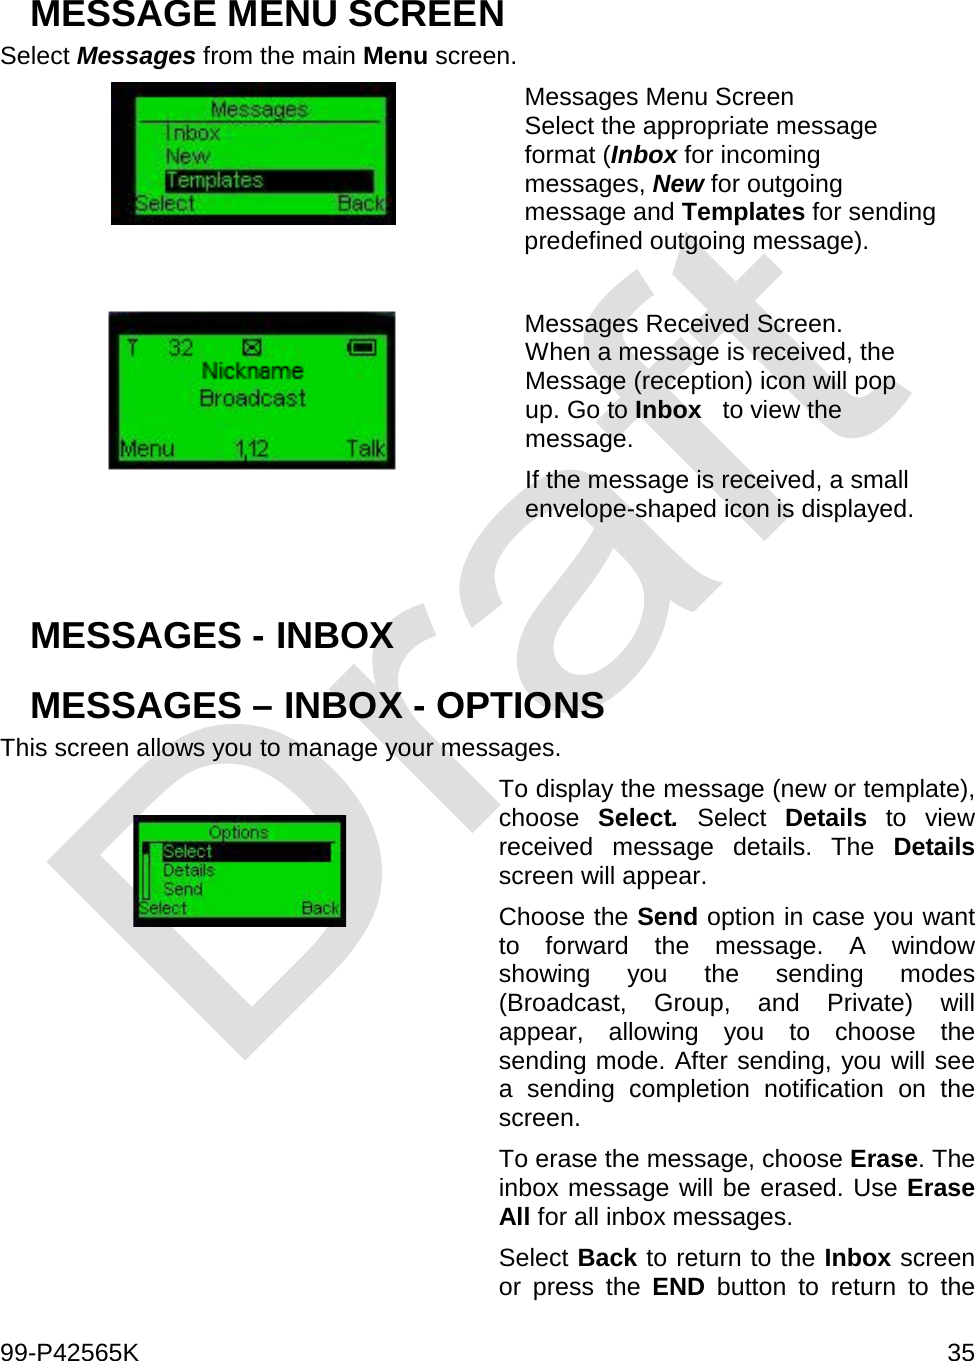  99-P42565K     35  MESSAGE MENU SCREEN  Select Messages from the main Menu screen.   Messages Menu Screen Select the appropriate message format (Inbox for incoming messages, New for outgoing message and Templates for sending predefined outgoing message).   Messages Received Screen. When a message is received, the Message (reception) icon will pop up. Go to Inbox   to view the message. If the message is received, a small envelope-shaped icon is displayed.   MESSAGES - INBOX MESSAGES – INBOX - OPTIONS  This screen allows you to manage your messages.   To display the message (new or template), choose  Select. Select  Details to view received message details. The Details screen will appear. Choose the Send option in case you want to forward the message. A window showing you the sending modes (Broadcast, Group, and Private) will appear, allowing you to choose the sending mode. After sending, you will see a sending completion notification on the screen. To erase the message, choose Erase. The inbox message will be erased. Use Erase All for all inbox messages. Select Back to return to the Inbox screen or press the END button to return to the 